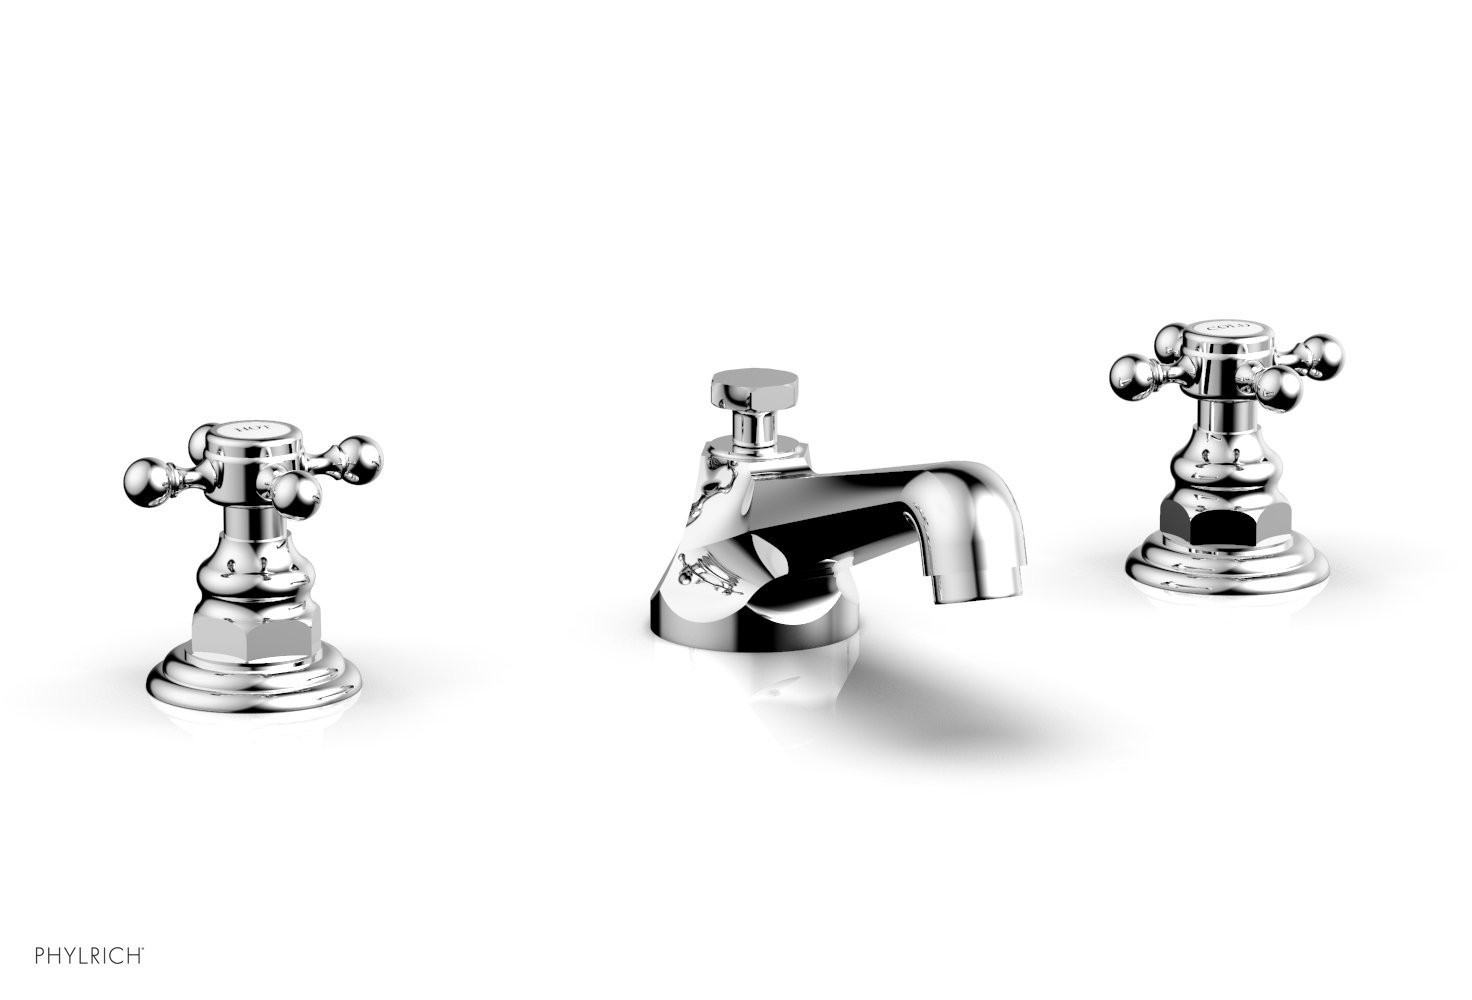 PHYLRICH 500-01 HEX TRADITIONAL THREE HOLE WIDESPREAD BATHROOM FAUCET WITH CROSS HANDLES